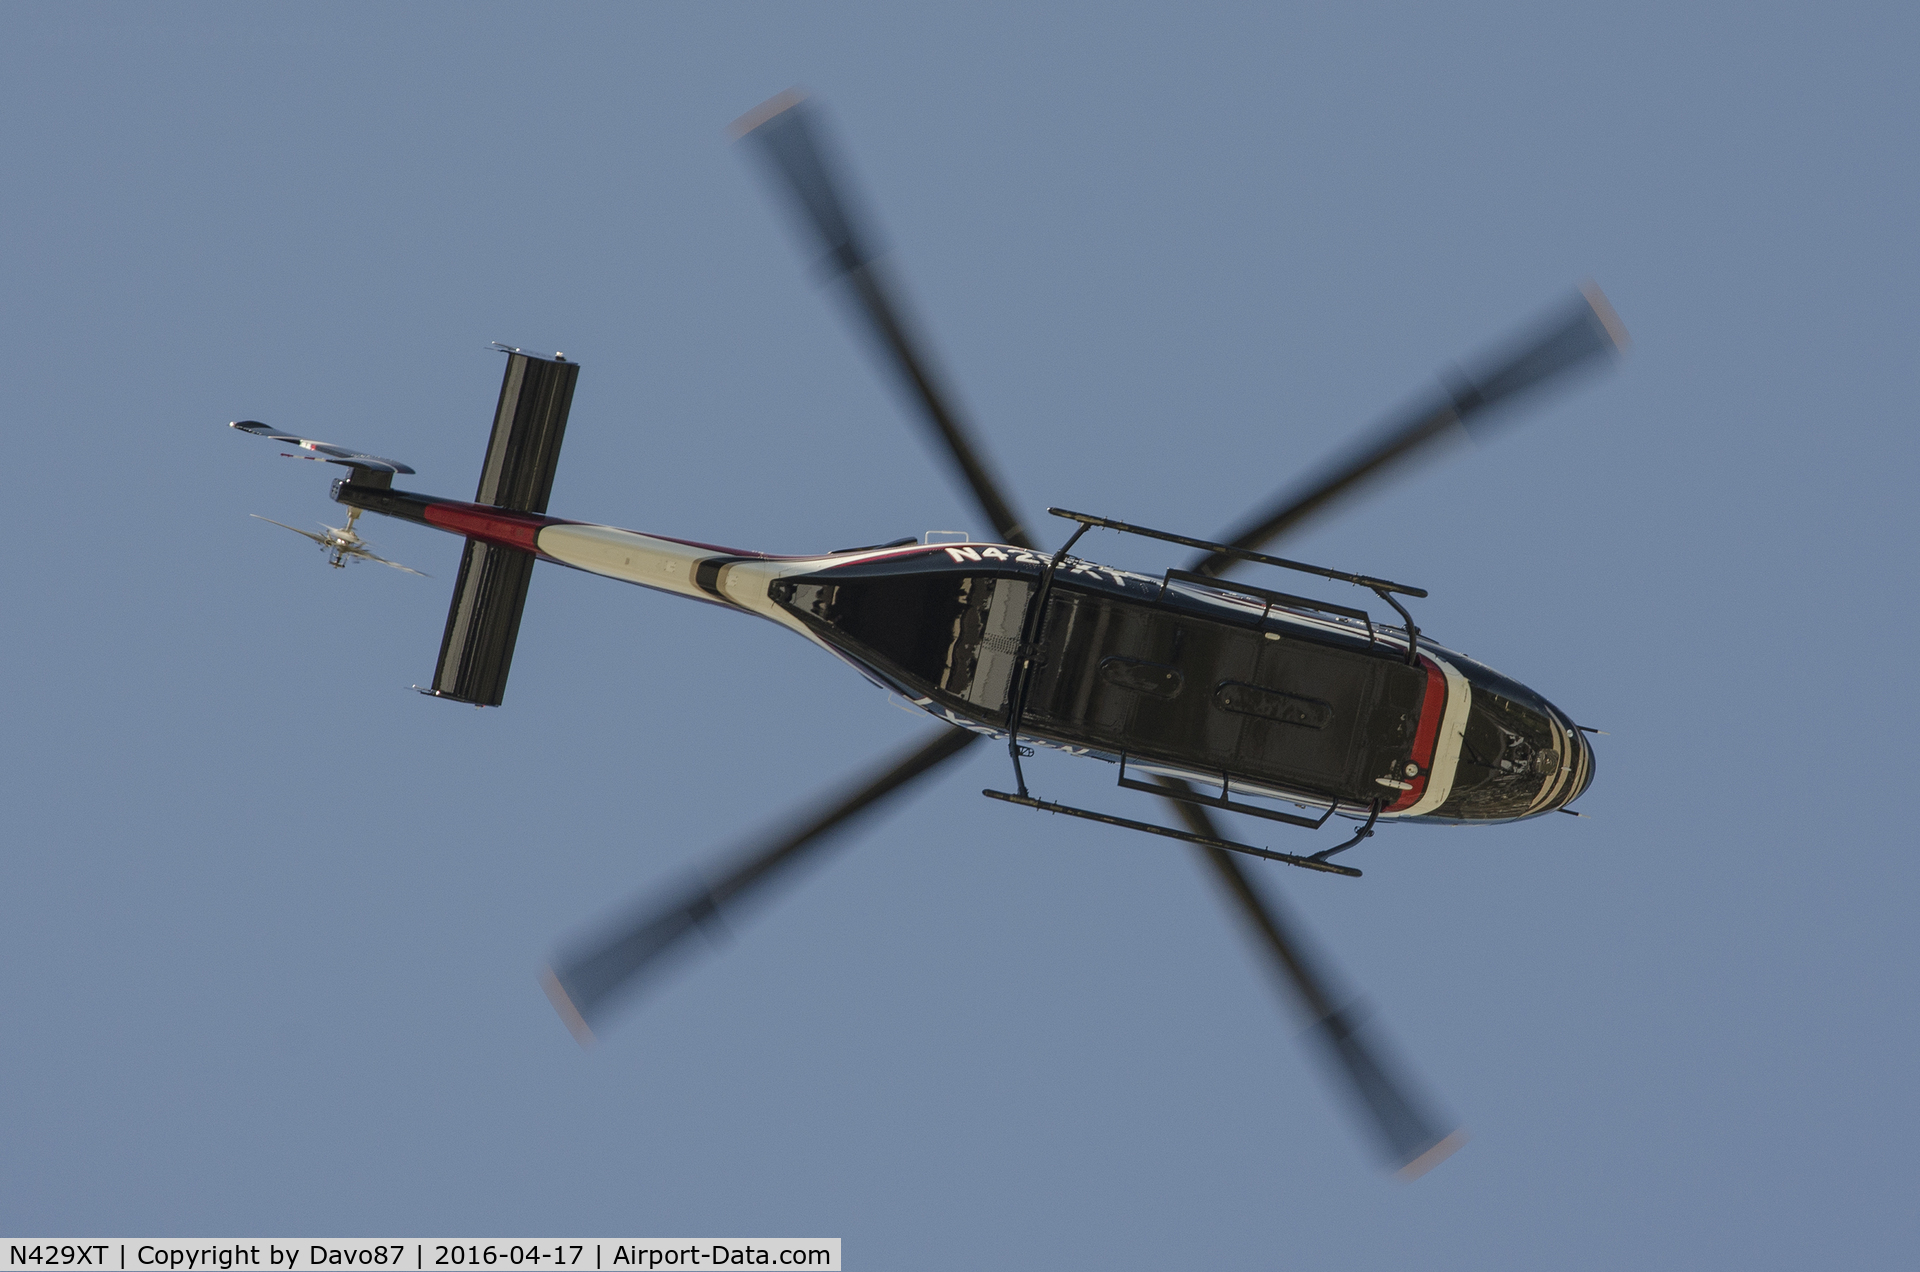 N429XT, Bell 429 GlobalRanger C/N 57180, Photographed flying over Bristol Motor Speedway the weekend of the April 17th Food City 500 NASCAR race.